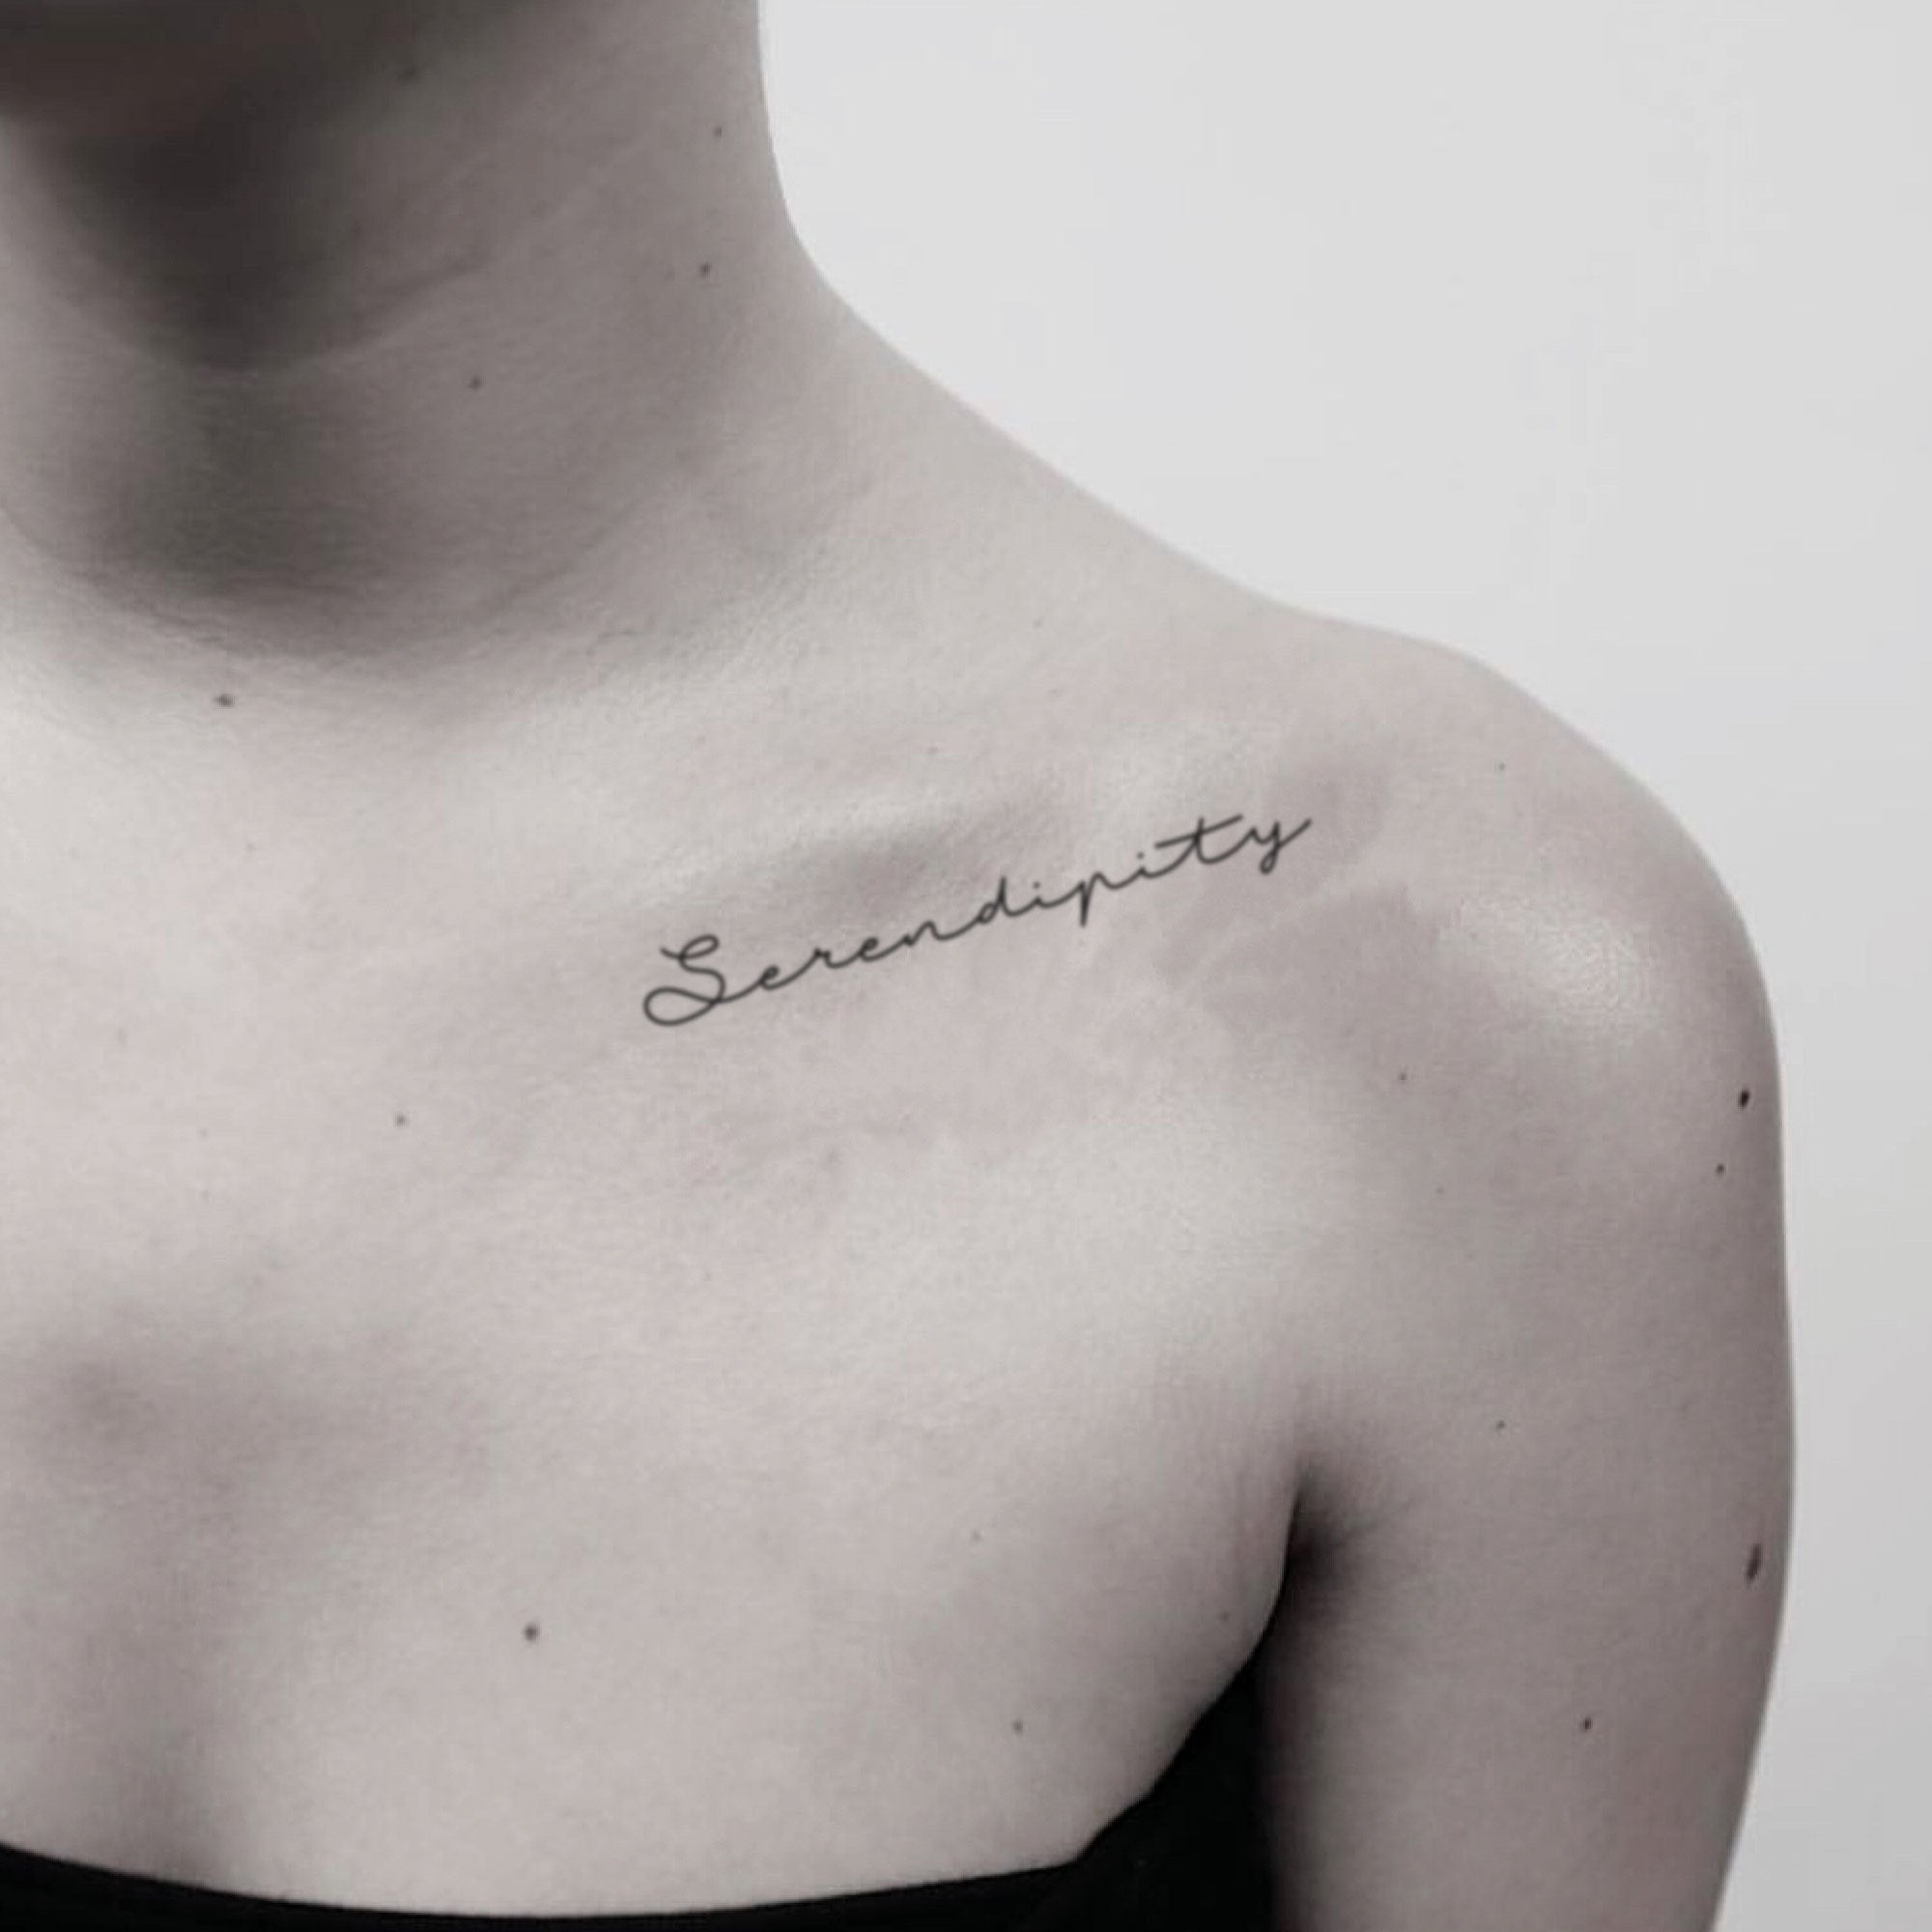 Serendipity Tattoo Meaning